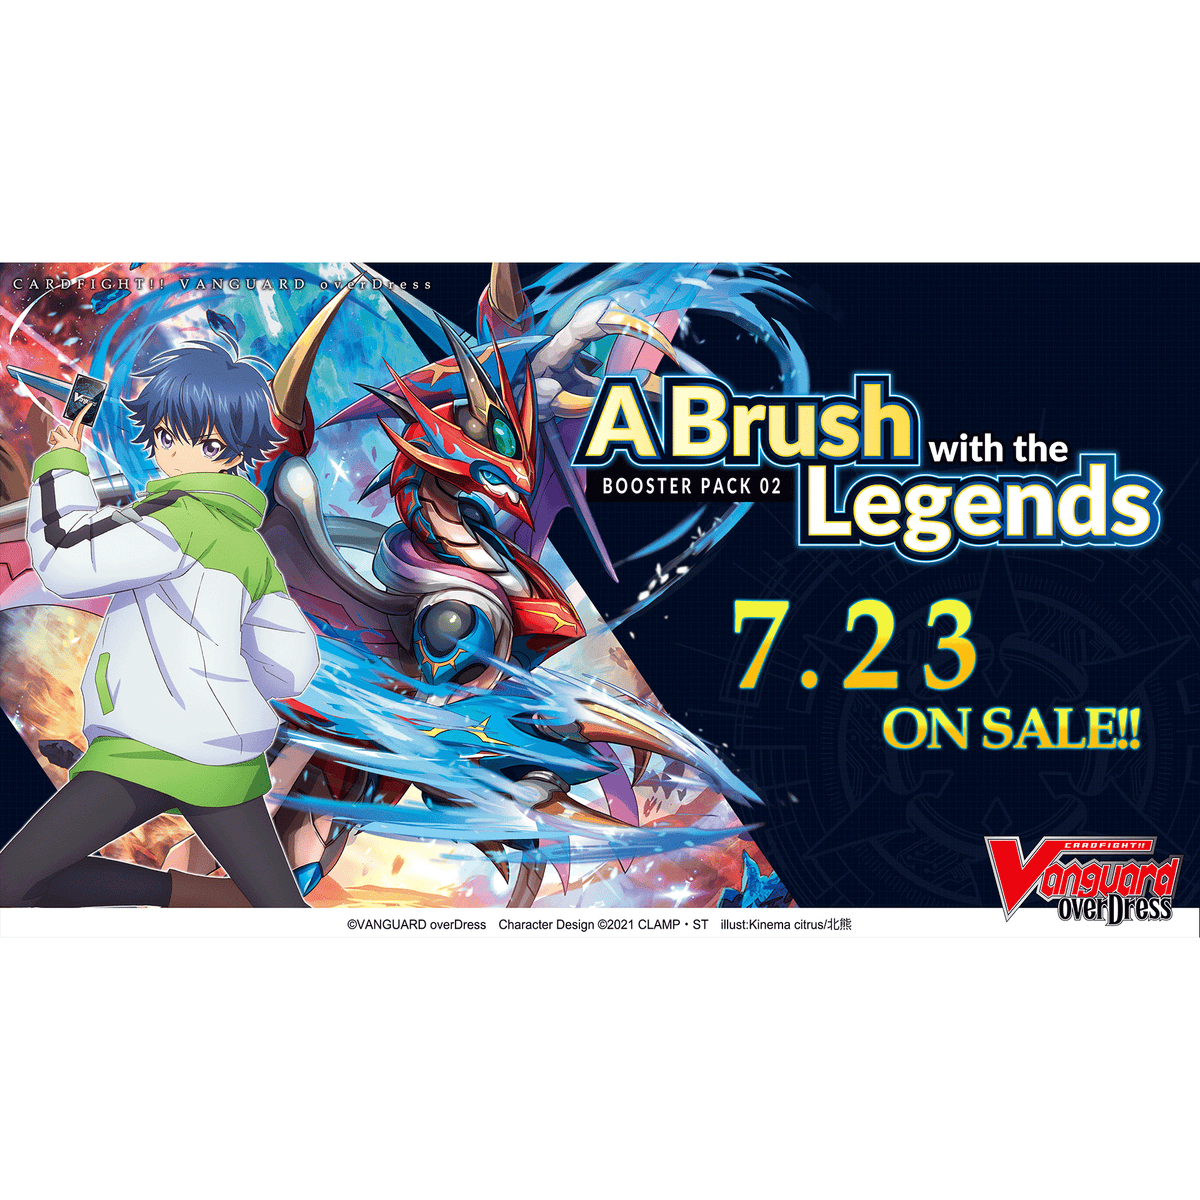 Cardfight!! Vanguard overDress Booster 2nd A Brush with the Legends [VGE-D-BT02] (English)-Booster Pack (Random)-Bushiroad-Ace Cards &amp; Collectibles